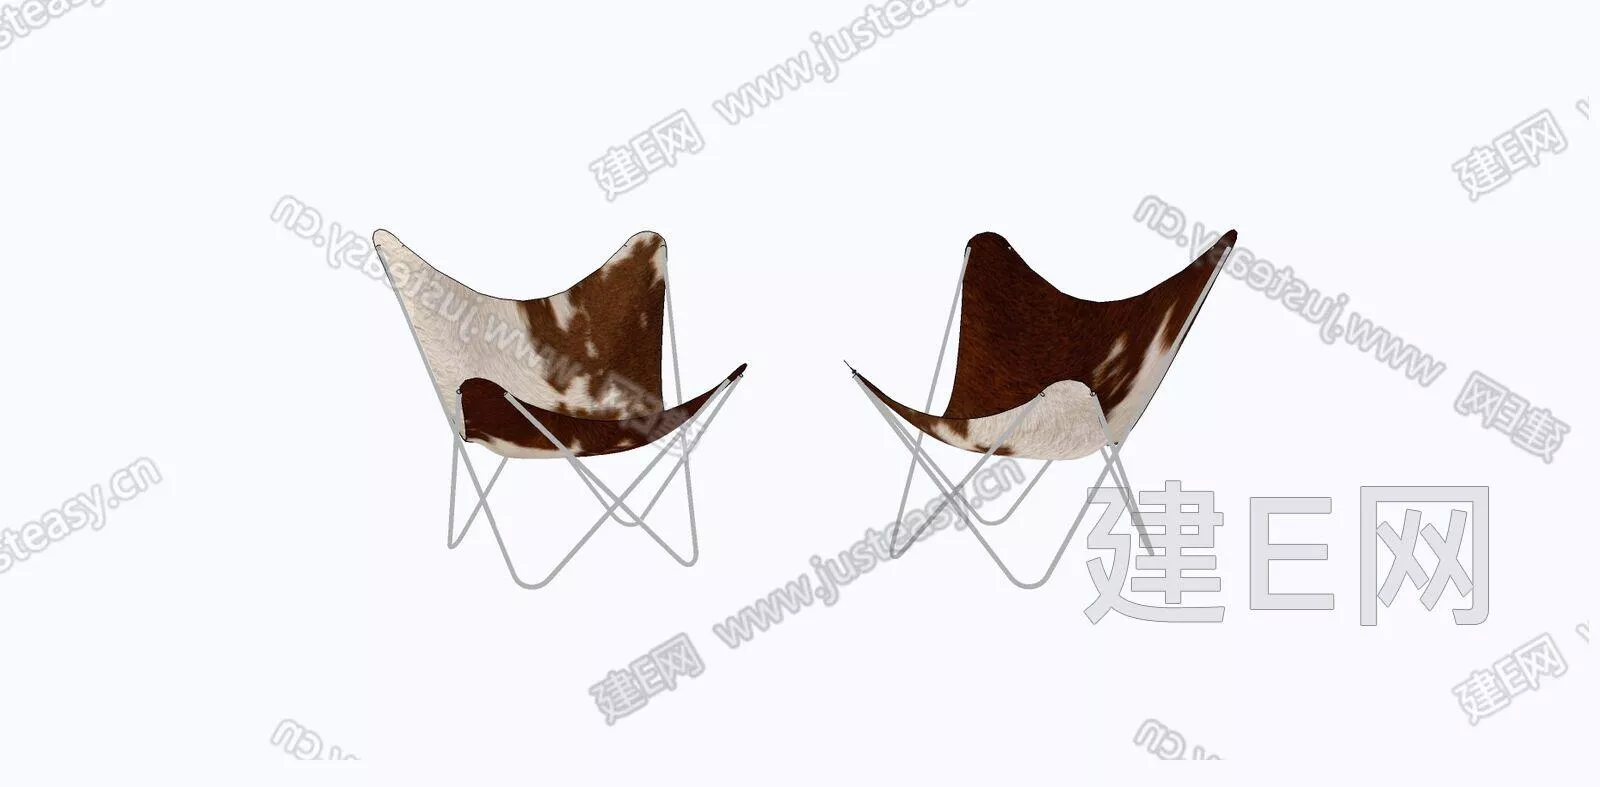 MODERN OFFICE CHAIR - SKETCHUP 3D MODEL - VRAY - 111625568